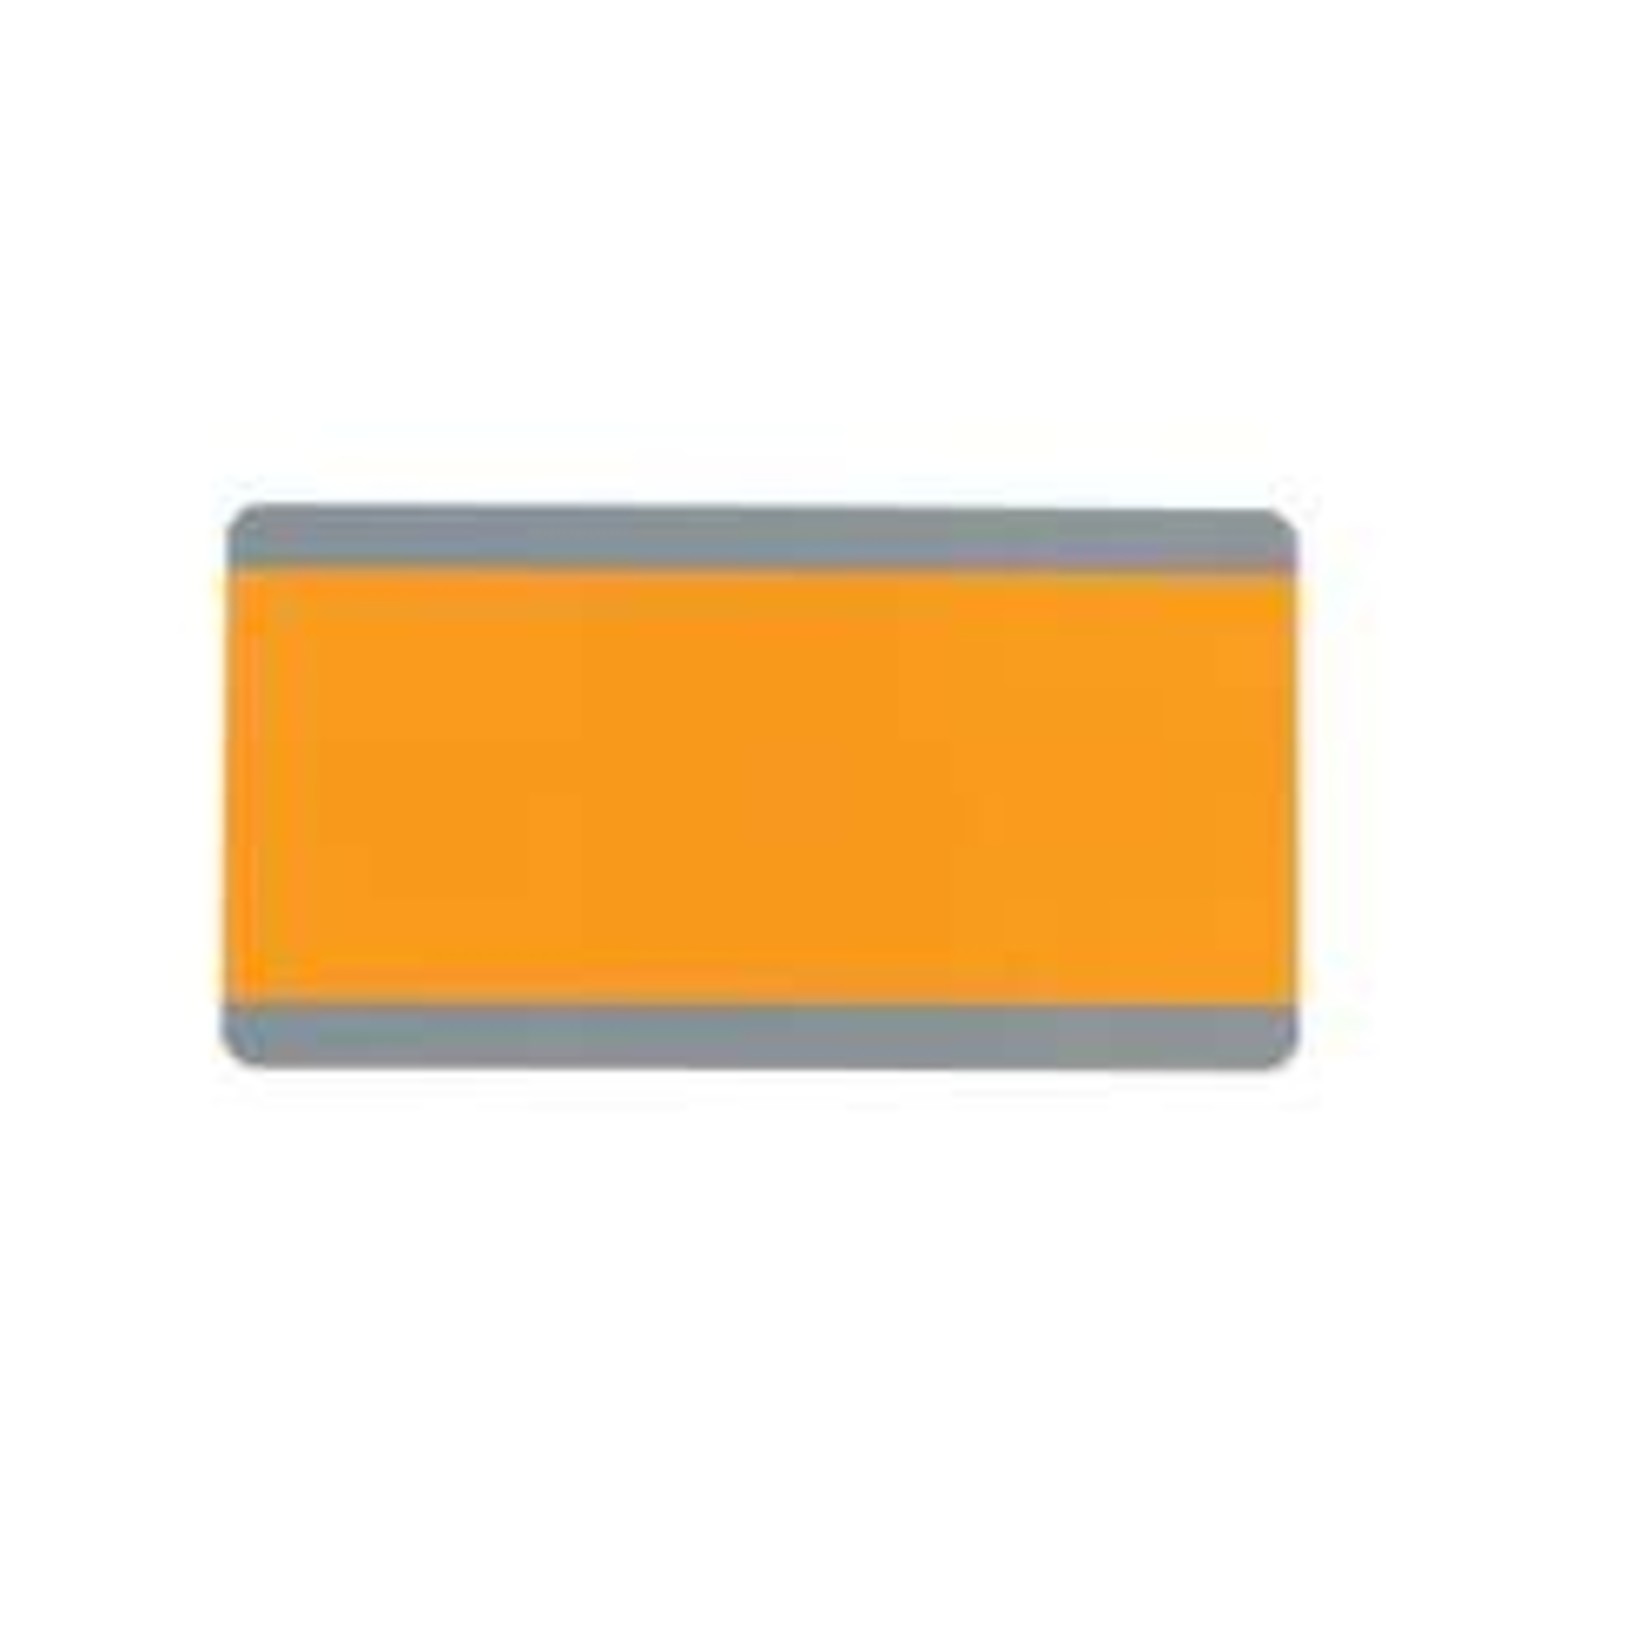 ASHLEY INCORPORATED Big Reading Guide Strips, Orange